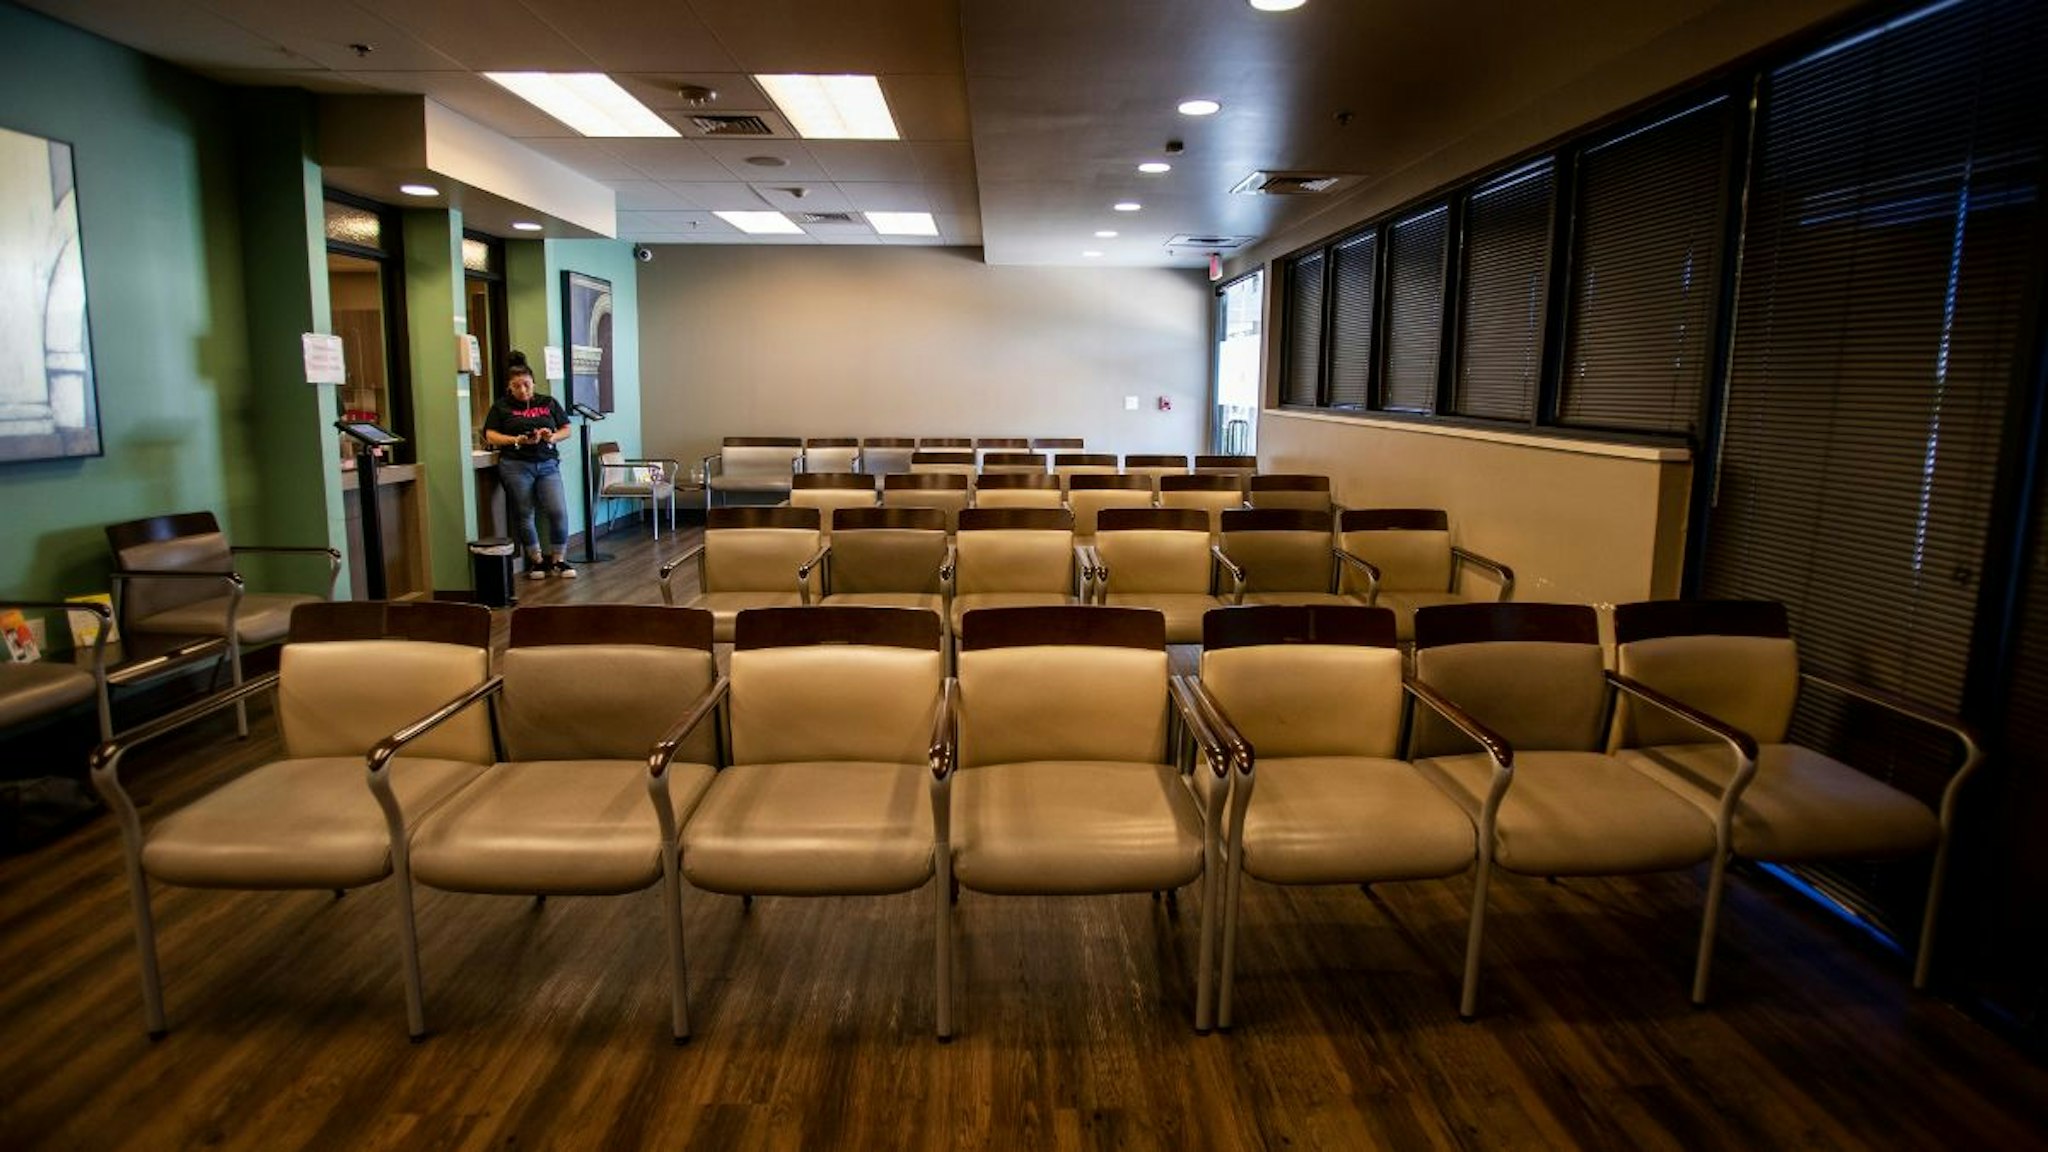 The waiting room at Alamo Womens Reproductive Services is empty as just an hour prior the Supreme Court overturned Roe v. Wade shutting down abortion services at Alamo Womens Reproductive Services on June 24, 2022 in San Antonio, Texas.